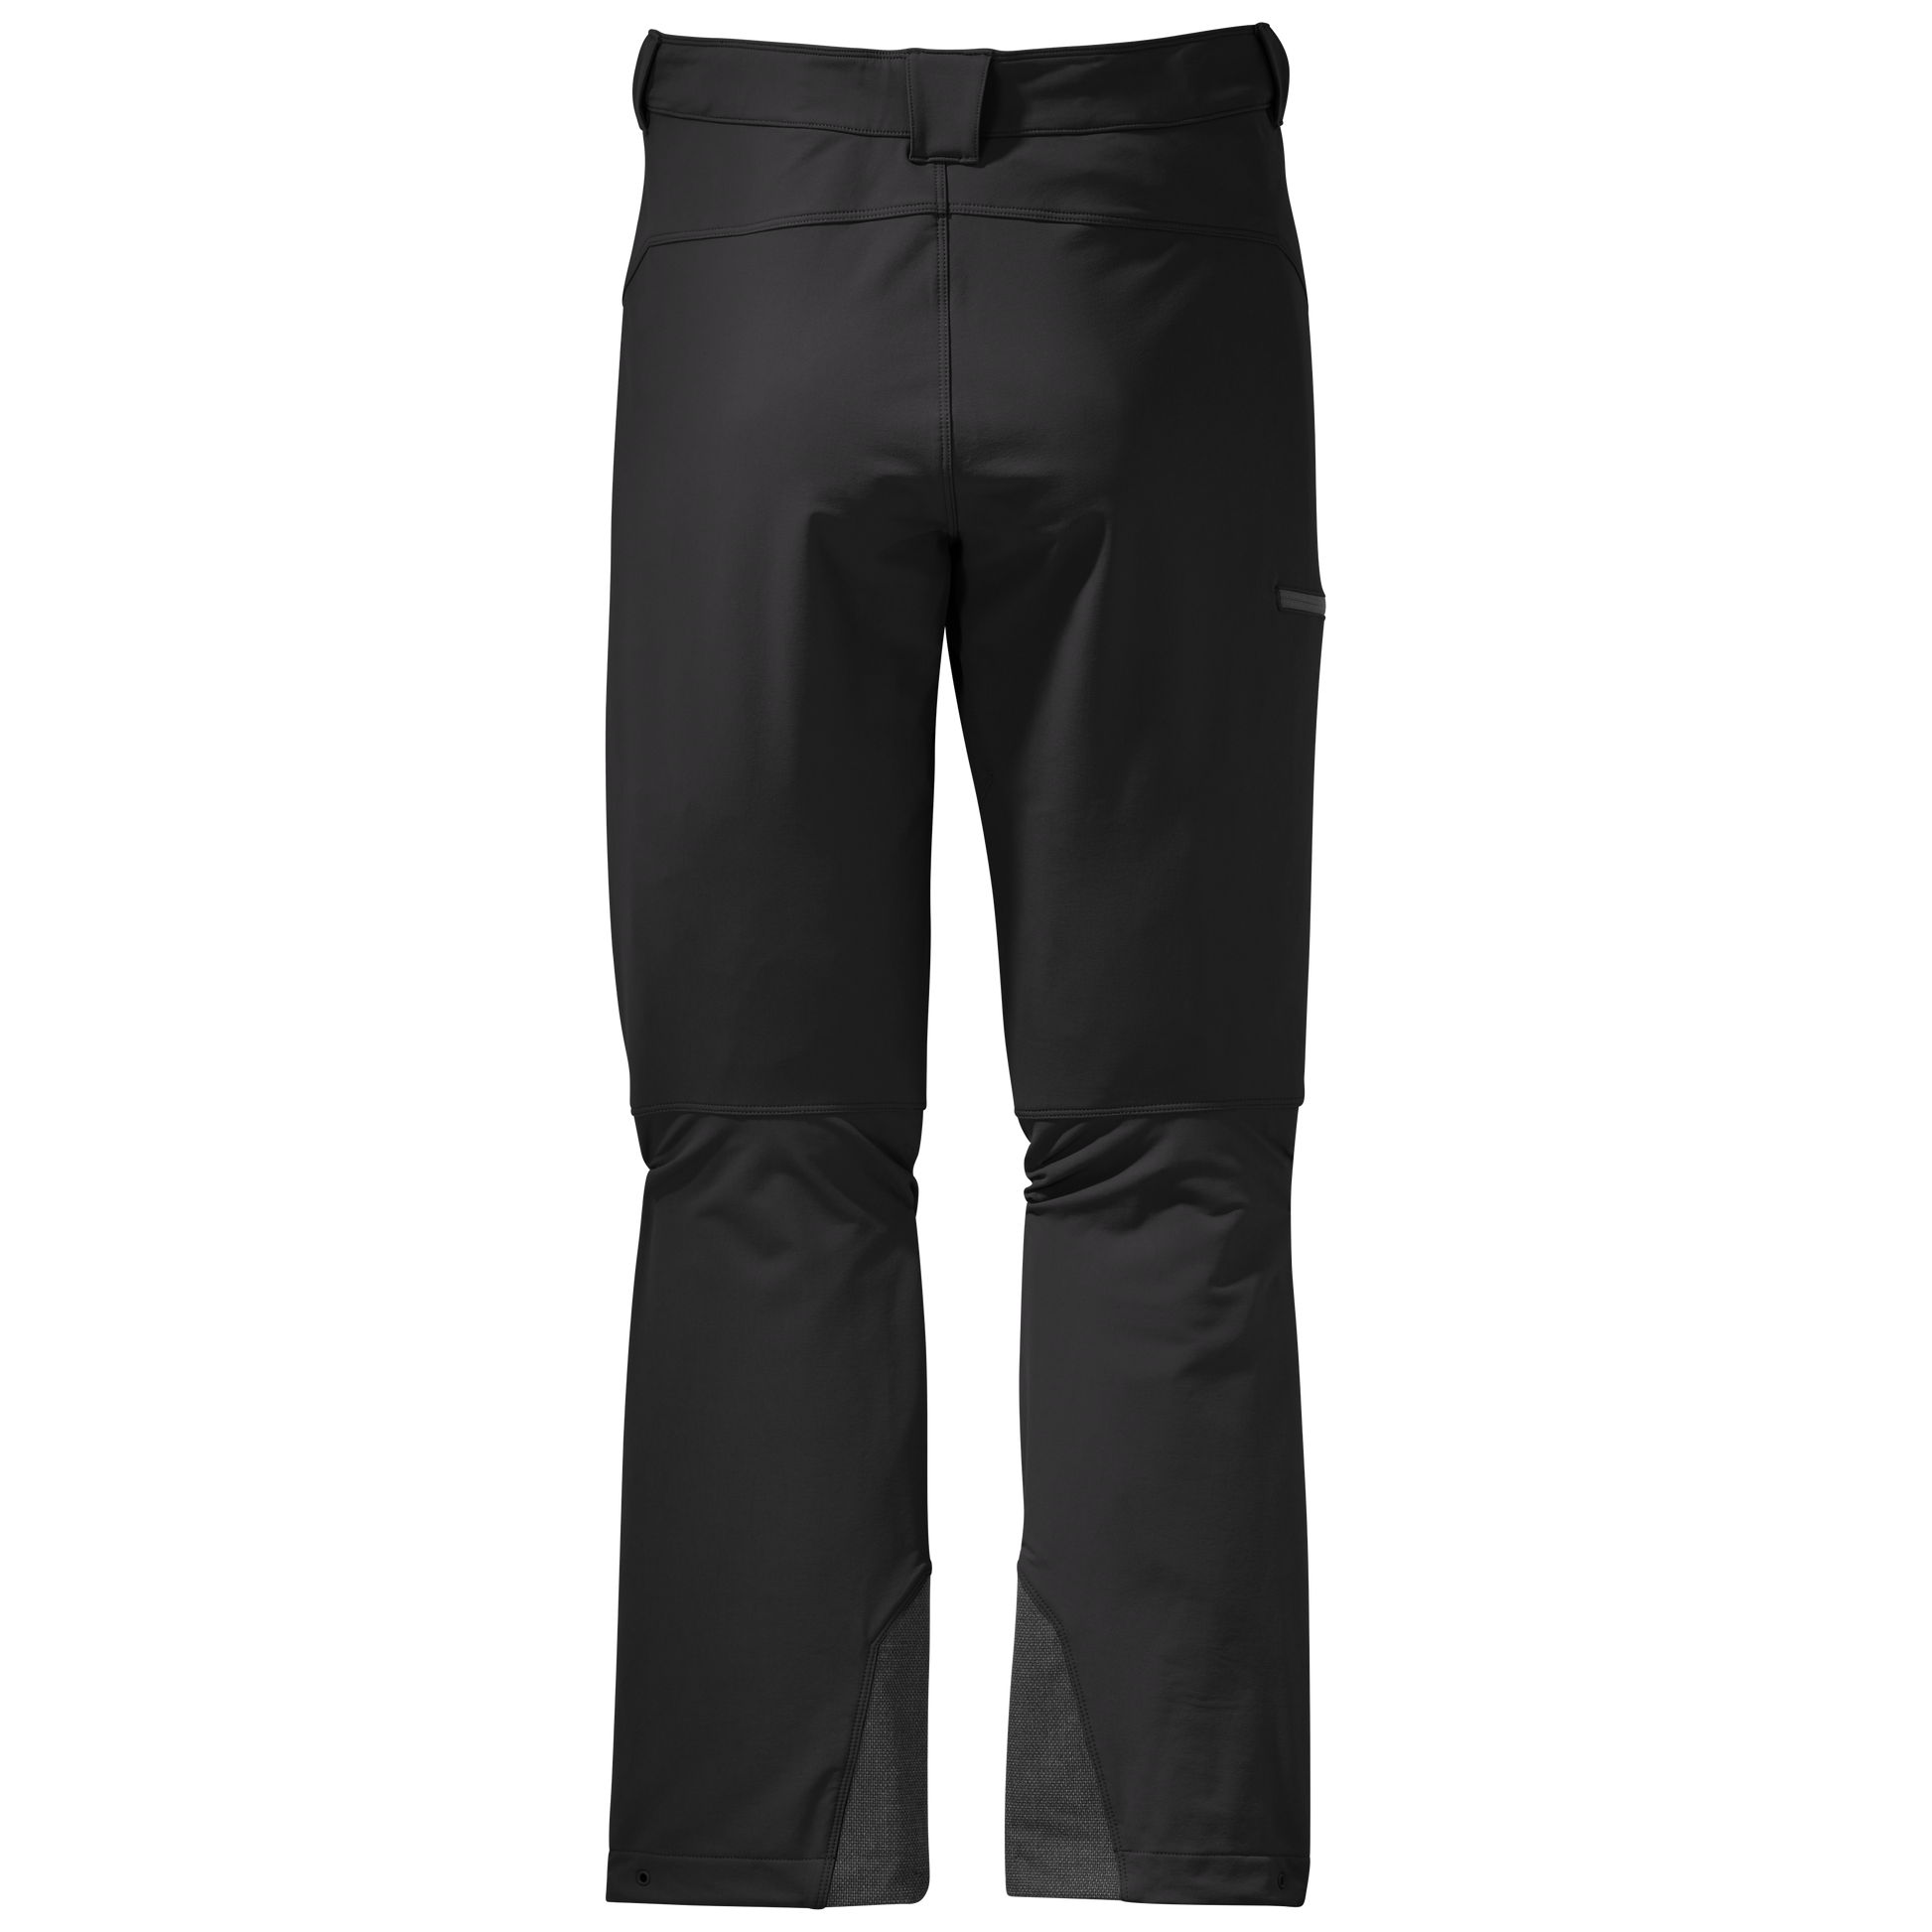 Plus Size Outdoor Research Women's Softshell Pants - Cirque II